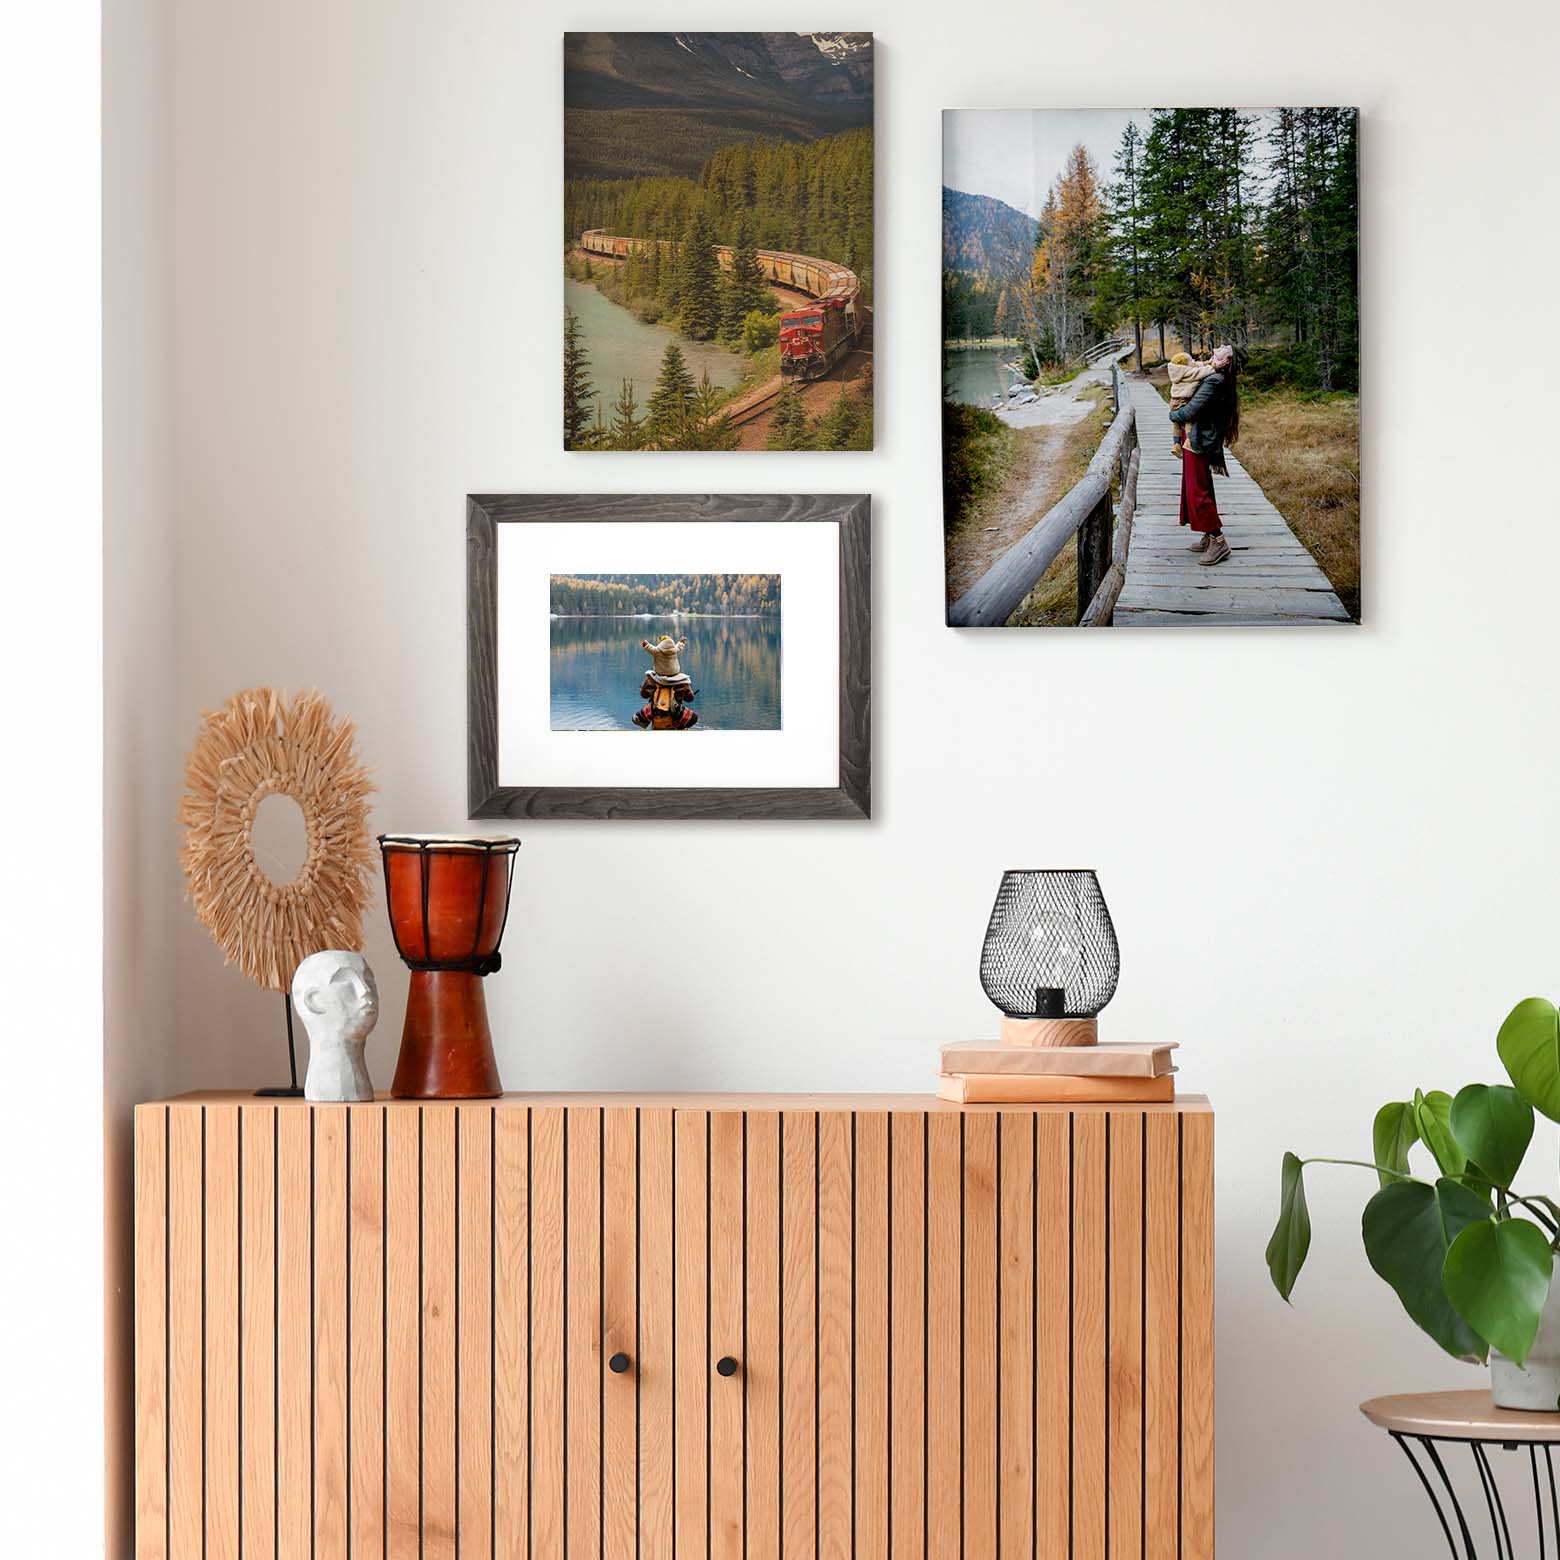 Three pictures arranged on the wall, different sizes and materials.